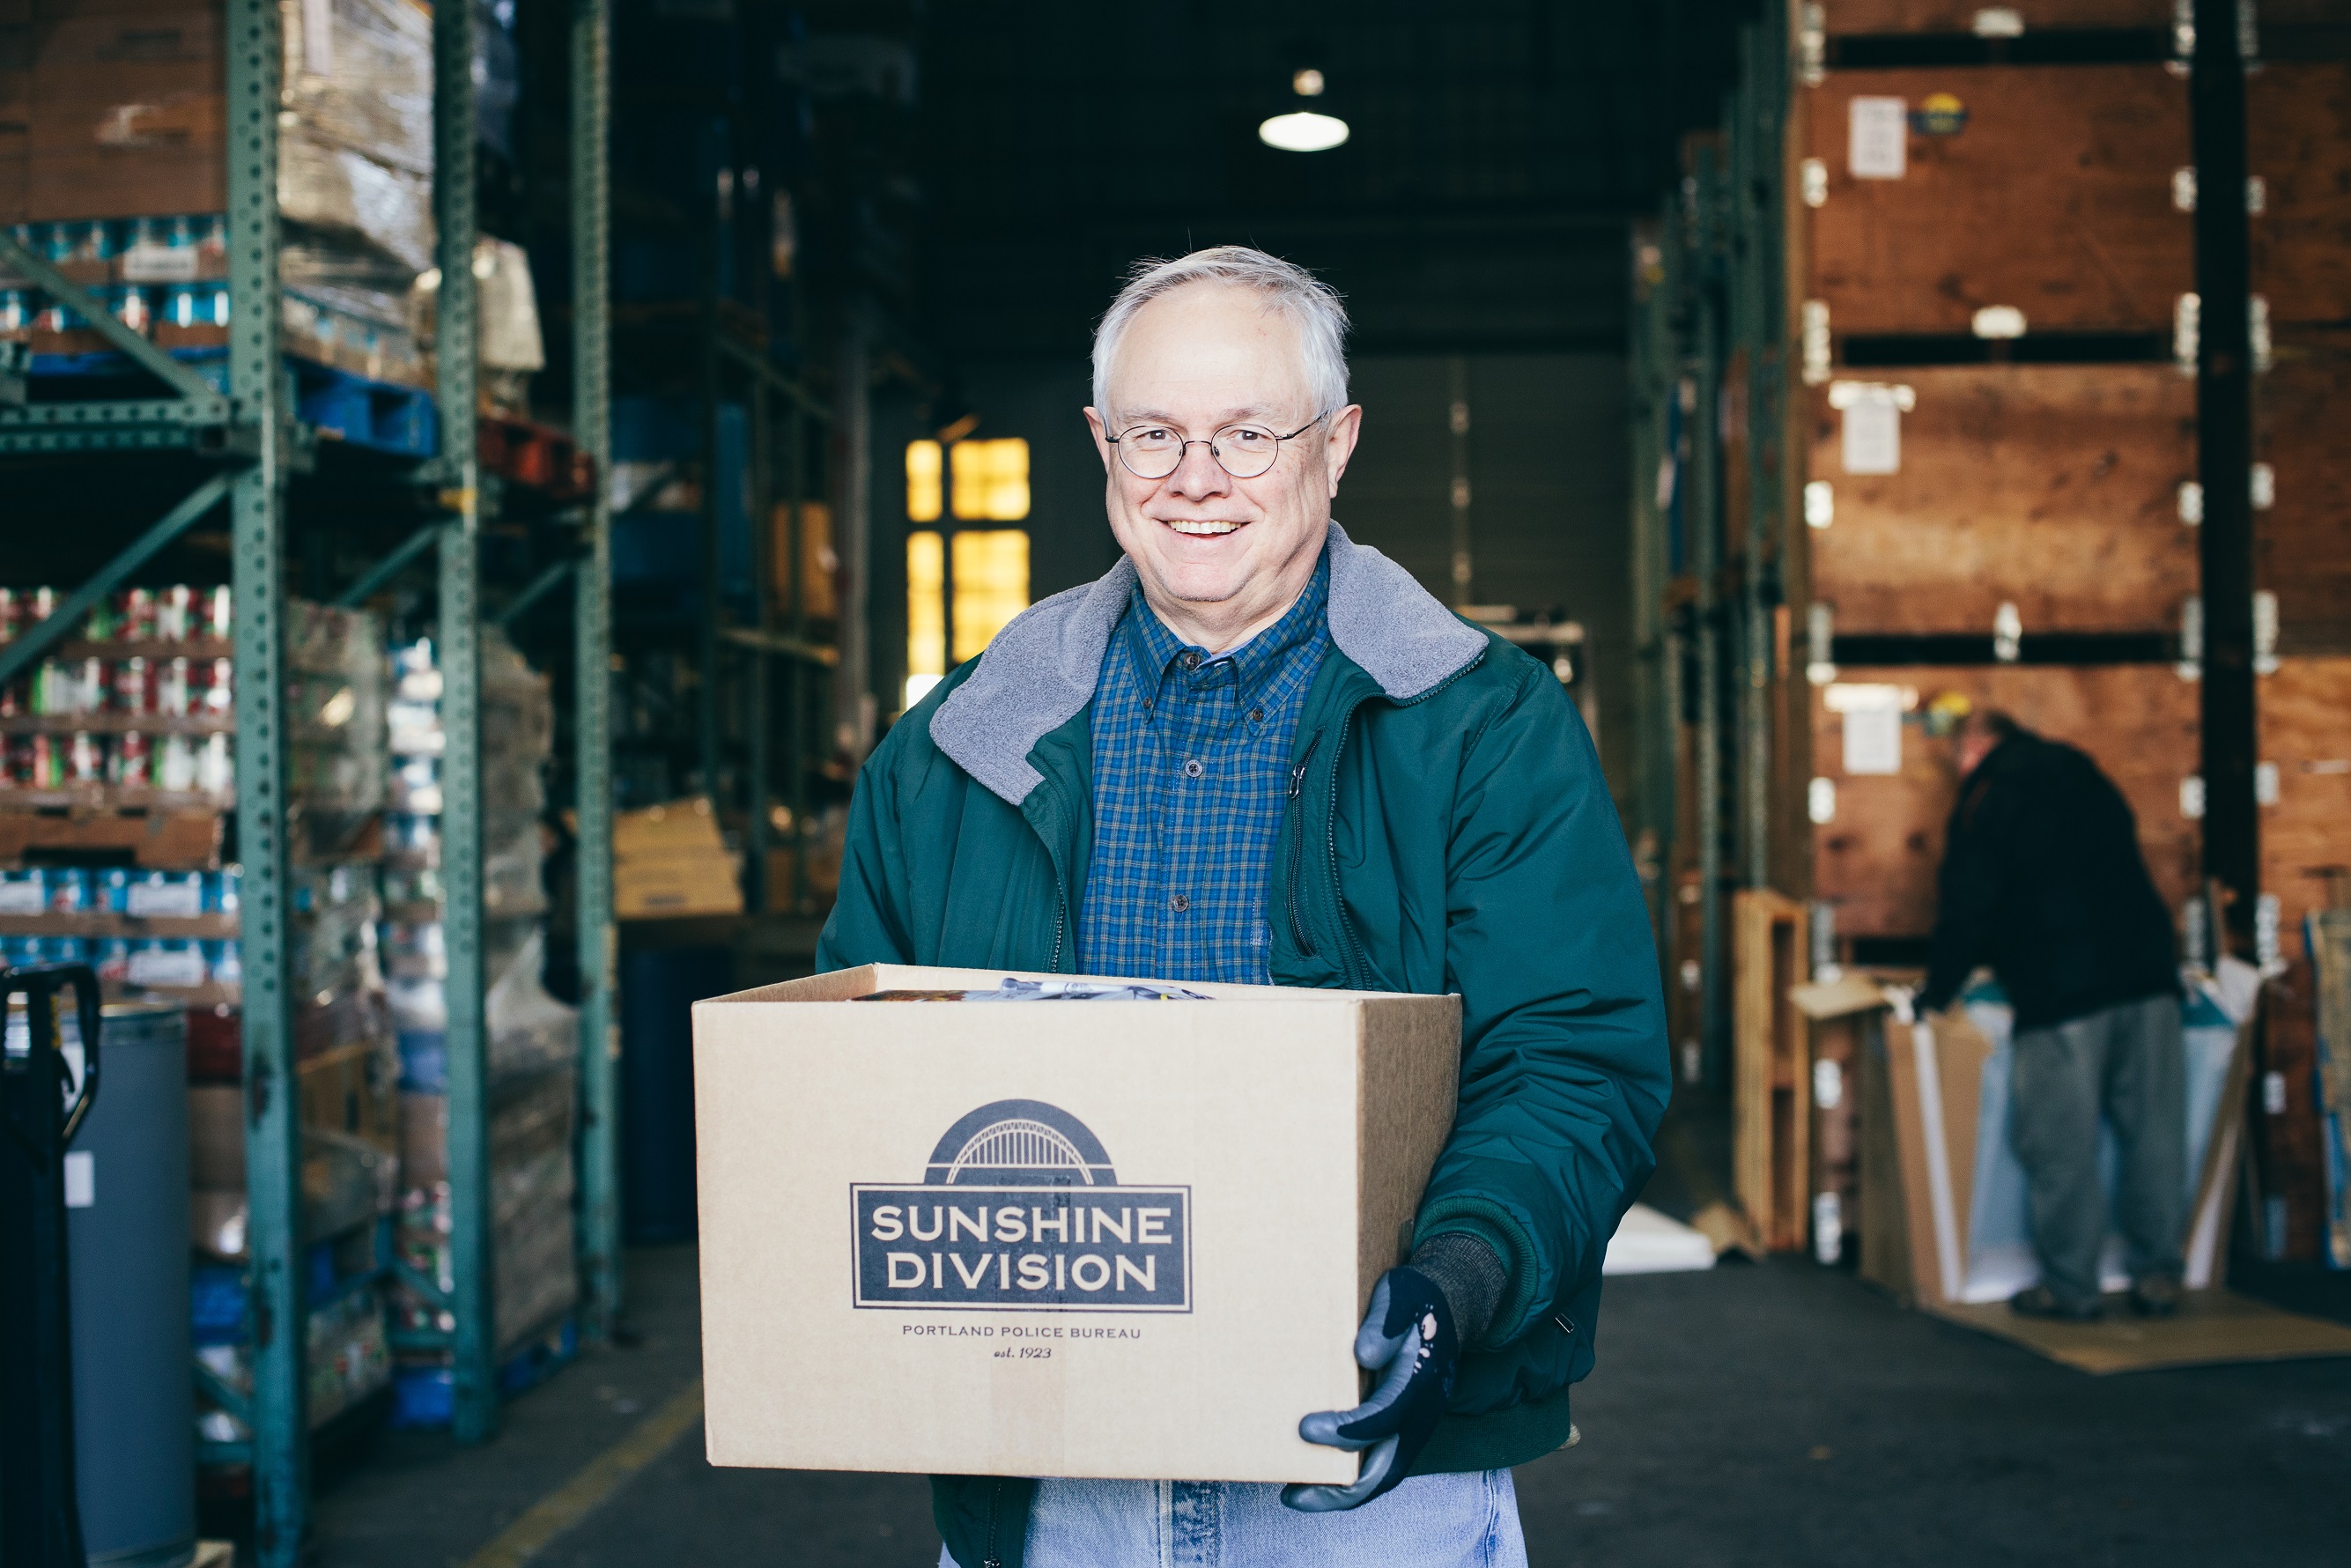 A man smiles and holds a box that says "Sunshine Division" inside a warehouse